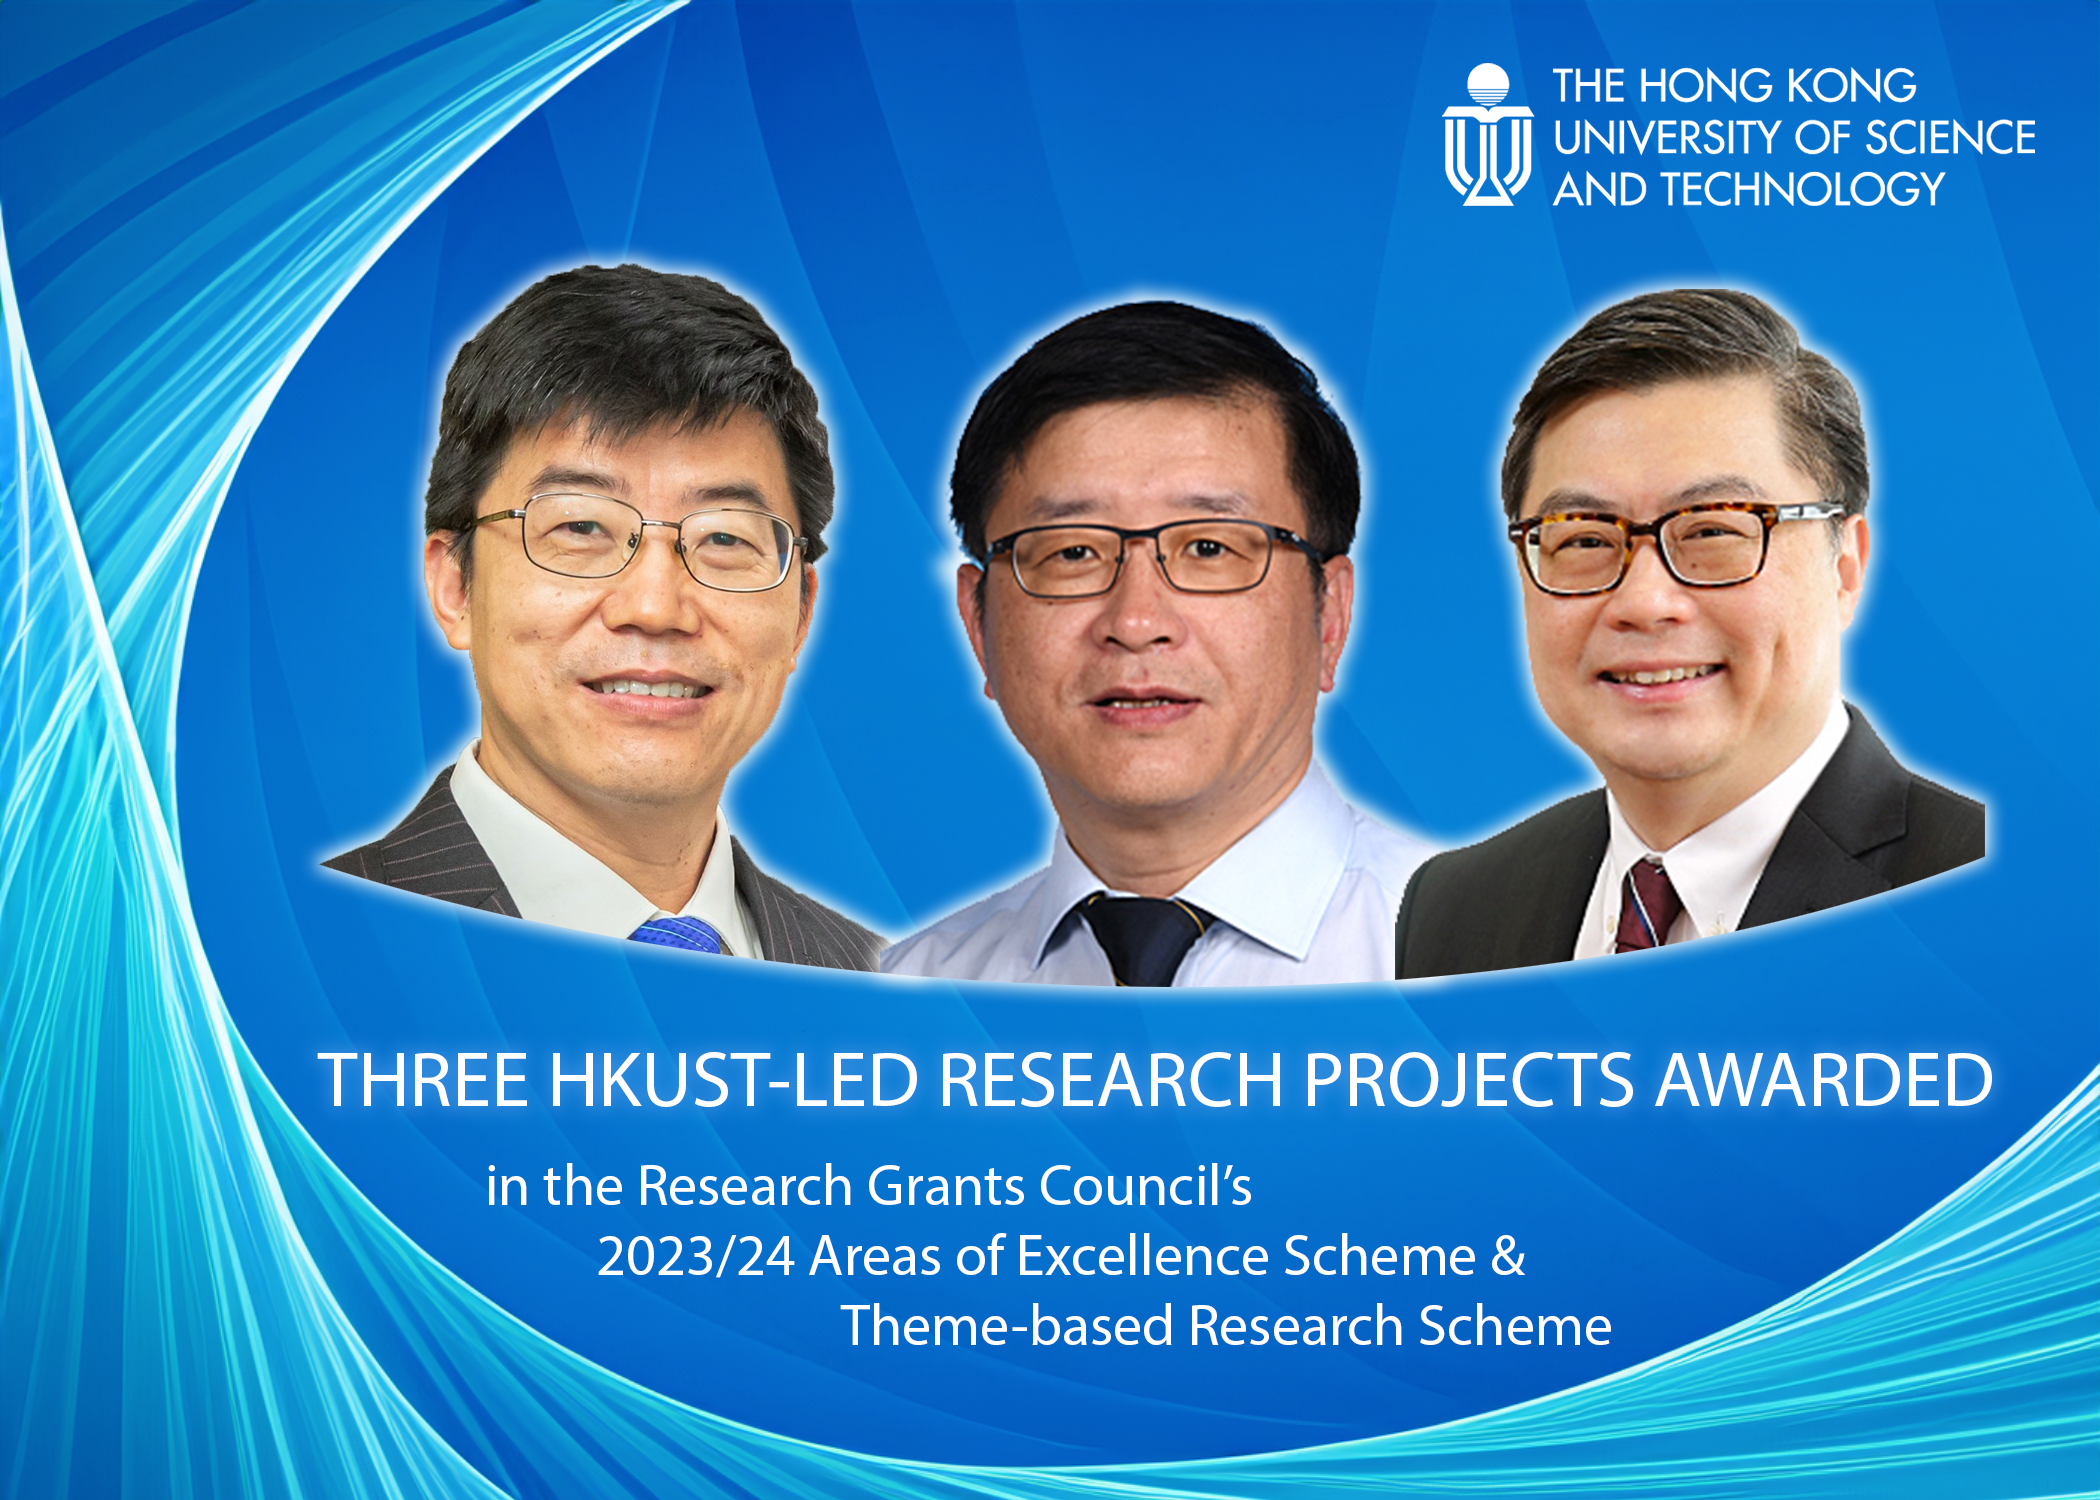 HKUST Tops in Areas of Excellence and Theme-based Research Schemes 2023/24 Funding